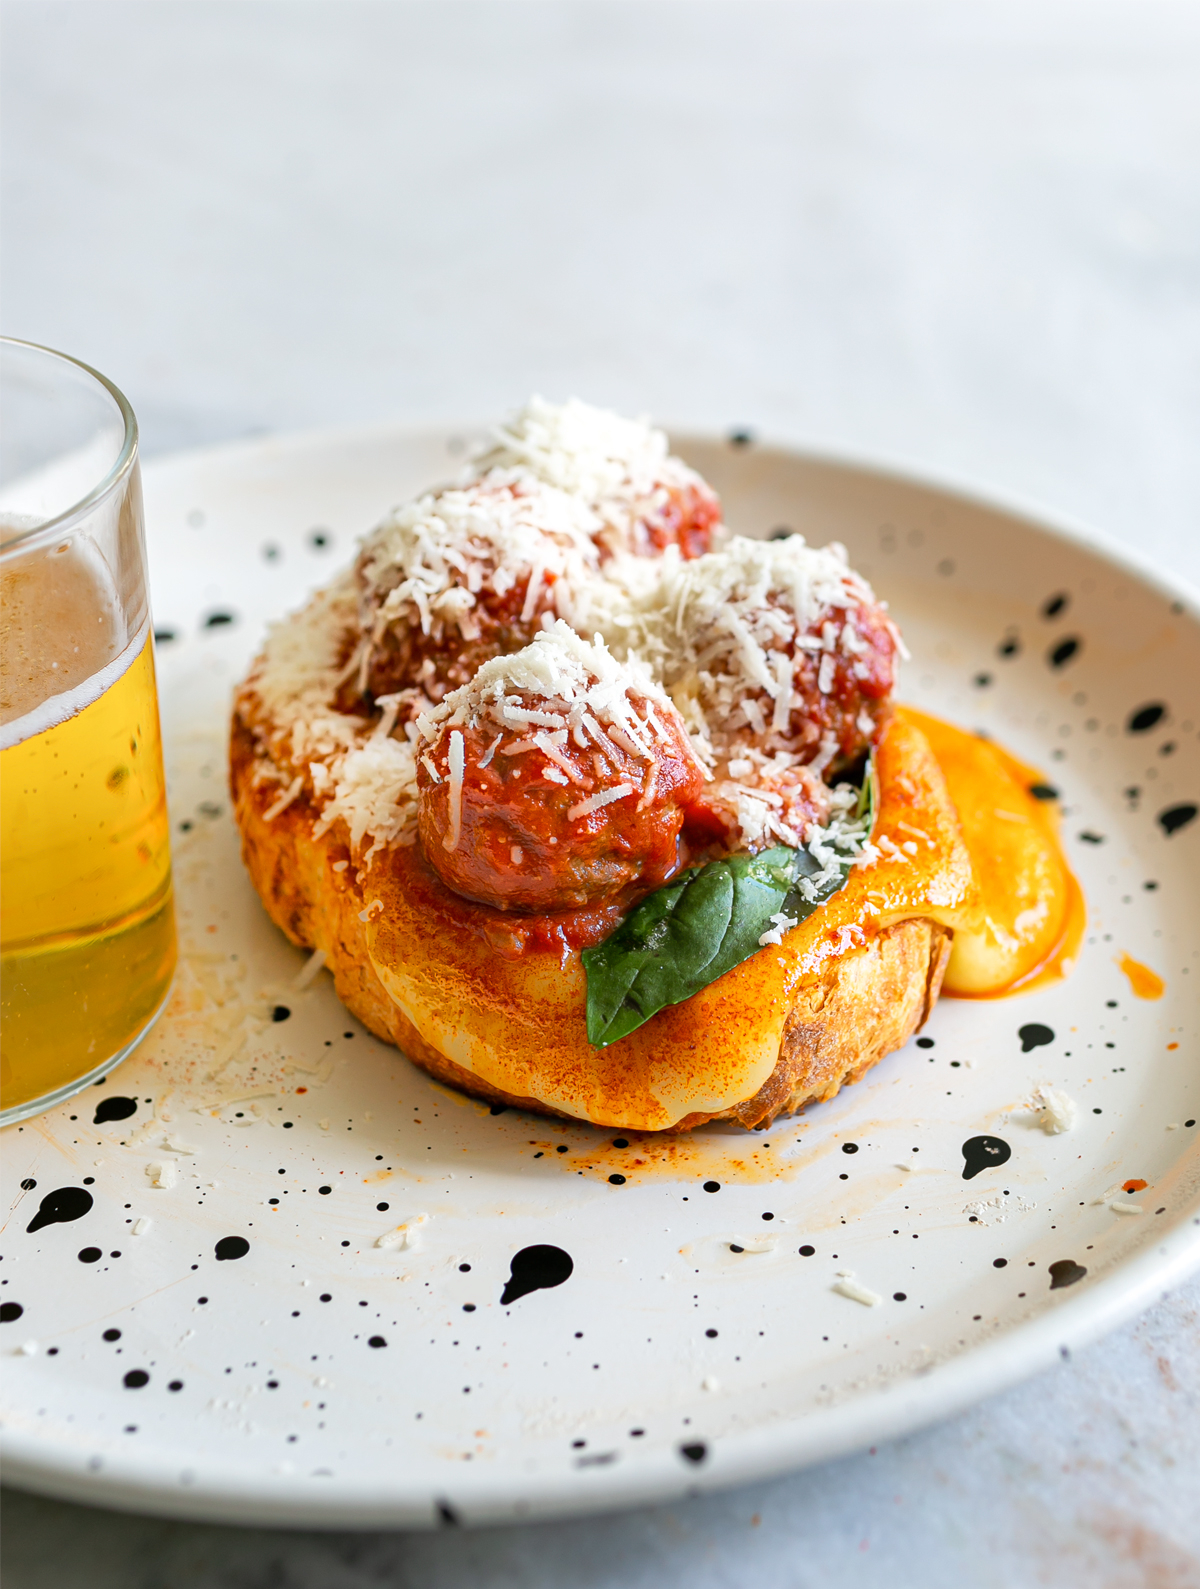 Toast topped with melted fondue cheese sauce, basil, meatballs in tomato sauce, grated parmesan and a glass of beer